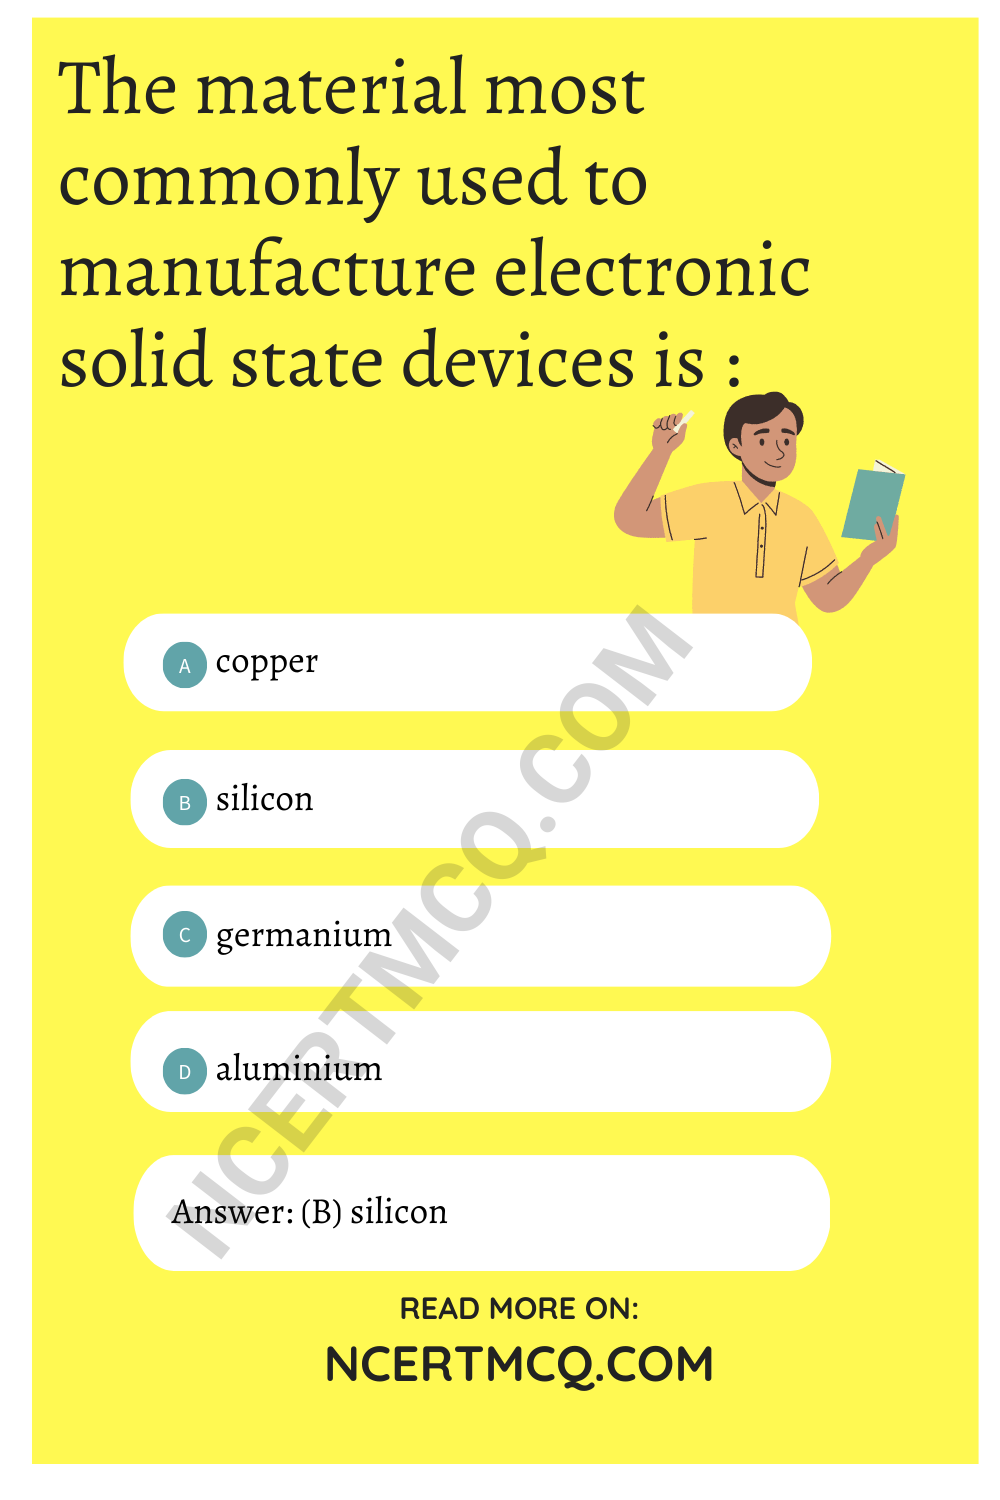 The material most commonly used to manufacture electronic solid state devices is :